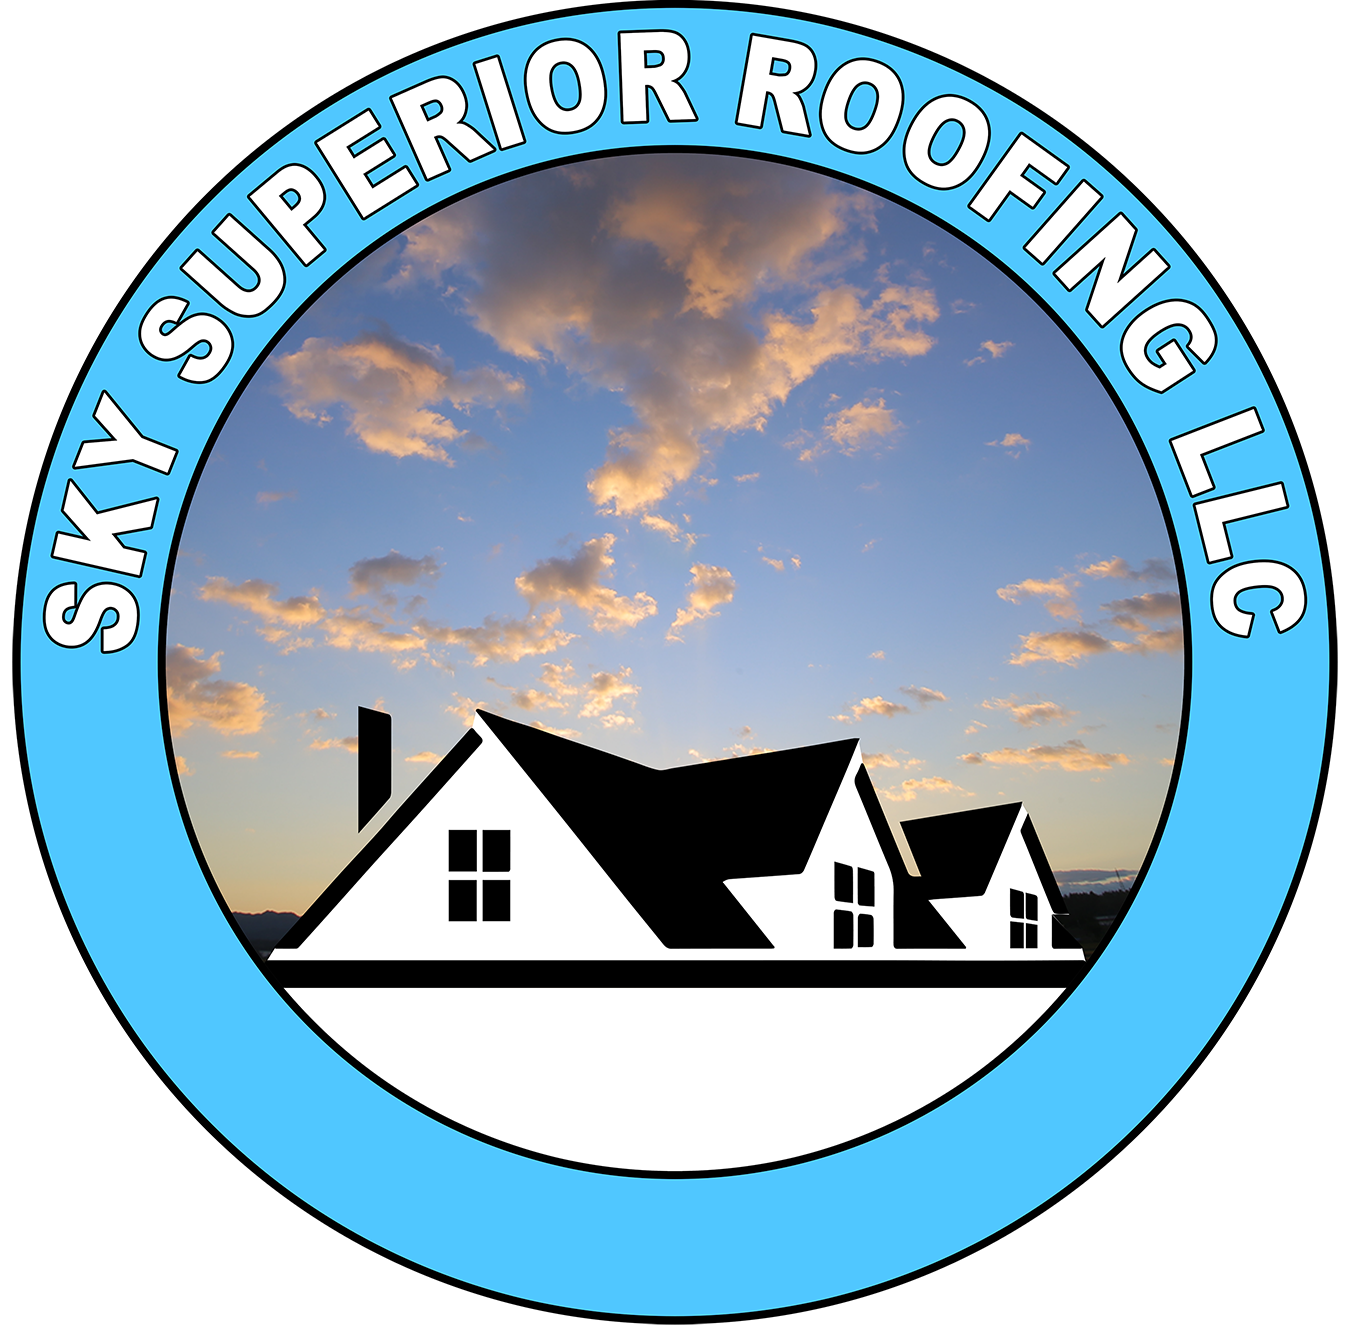 Sky Superior Roofing LLC